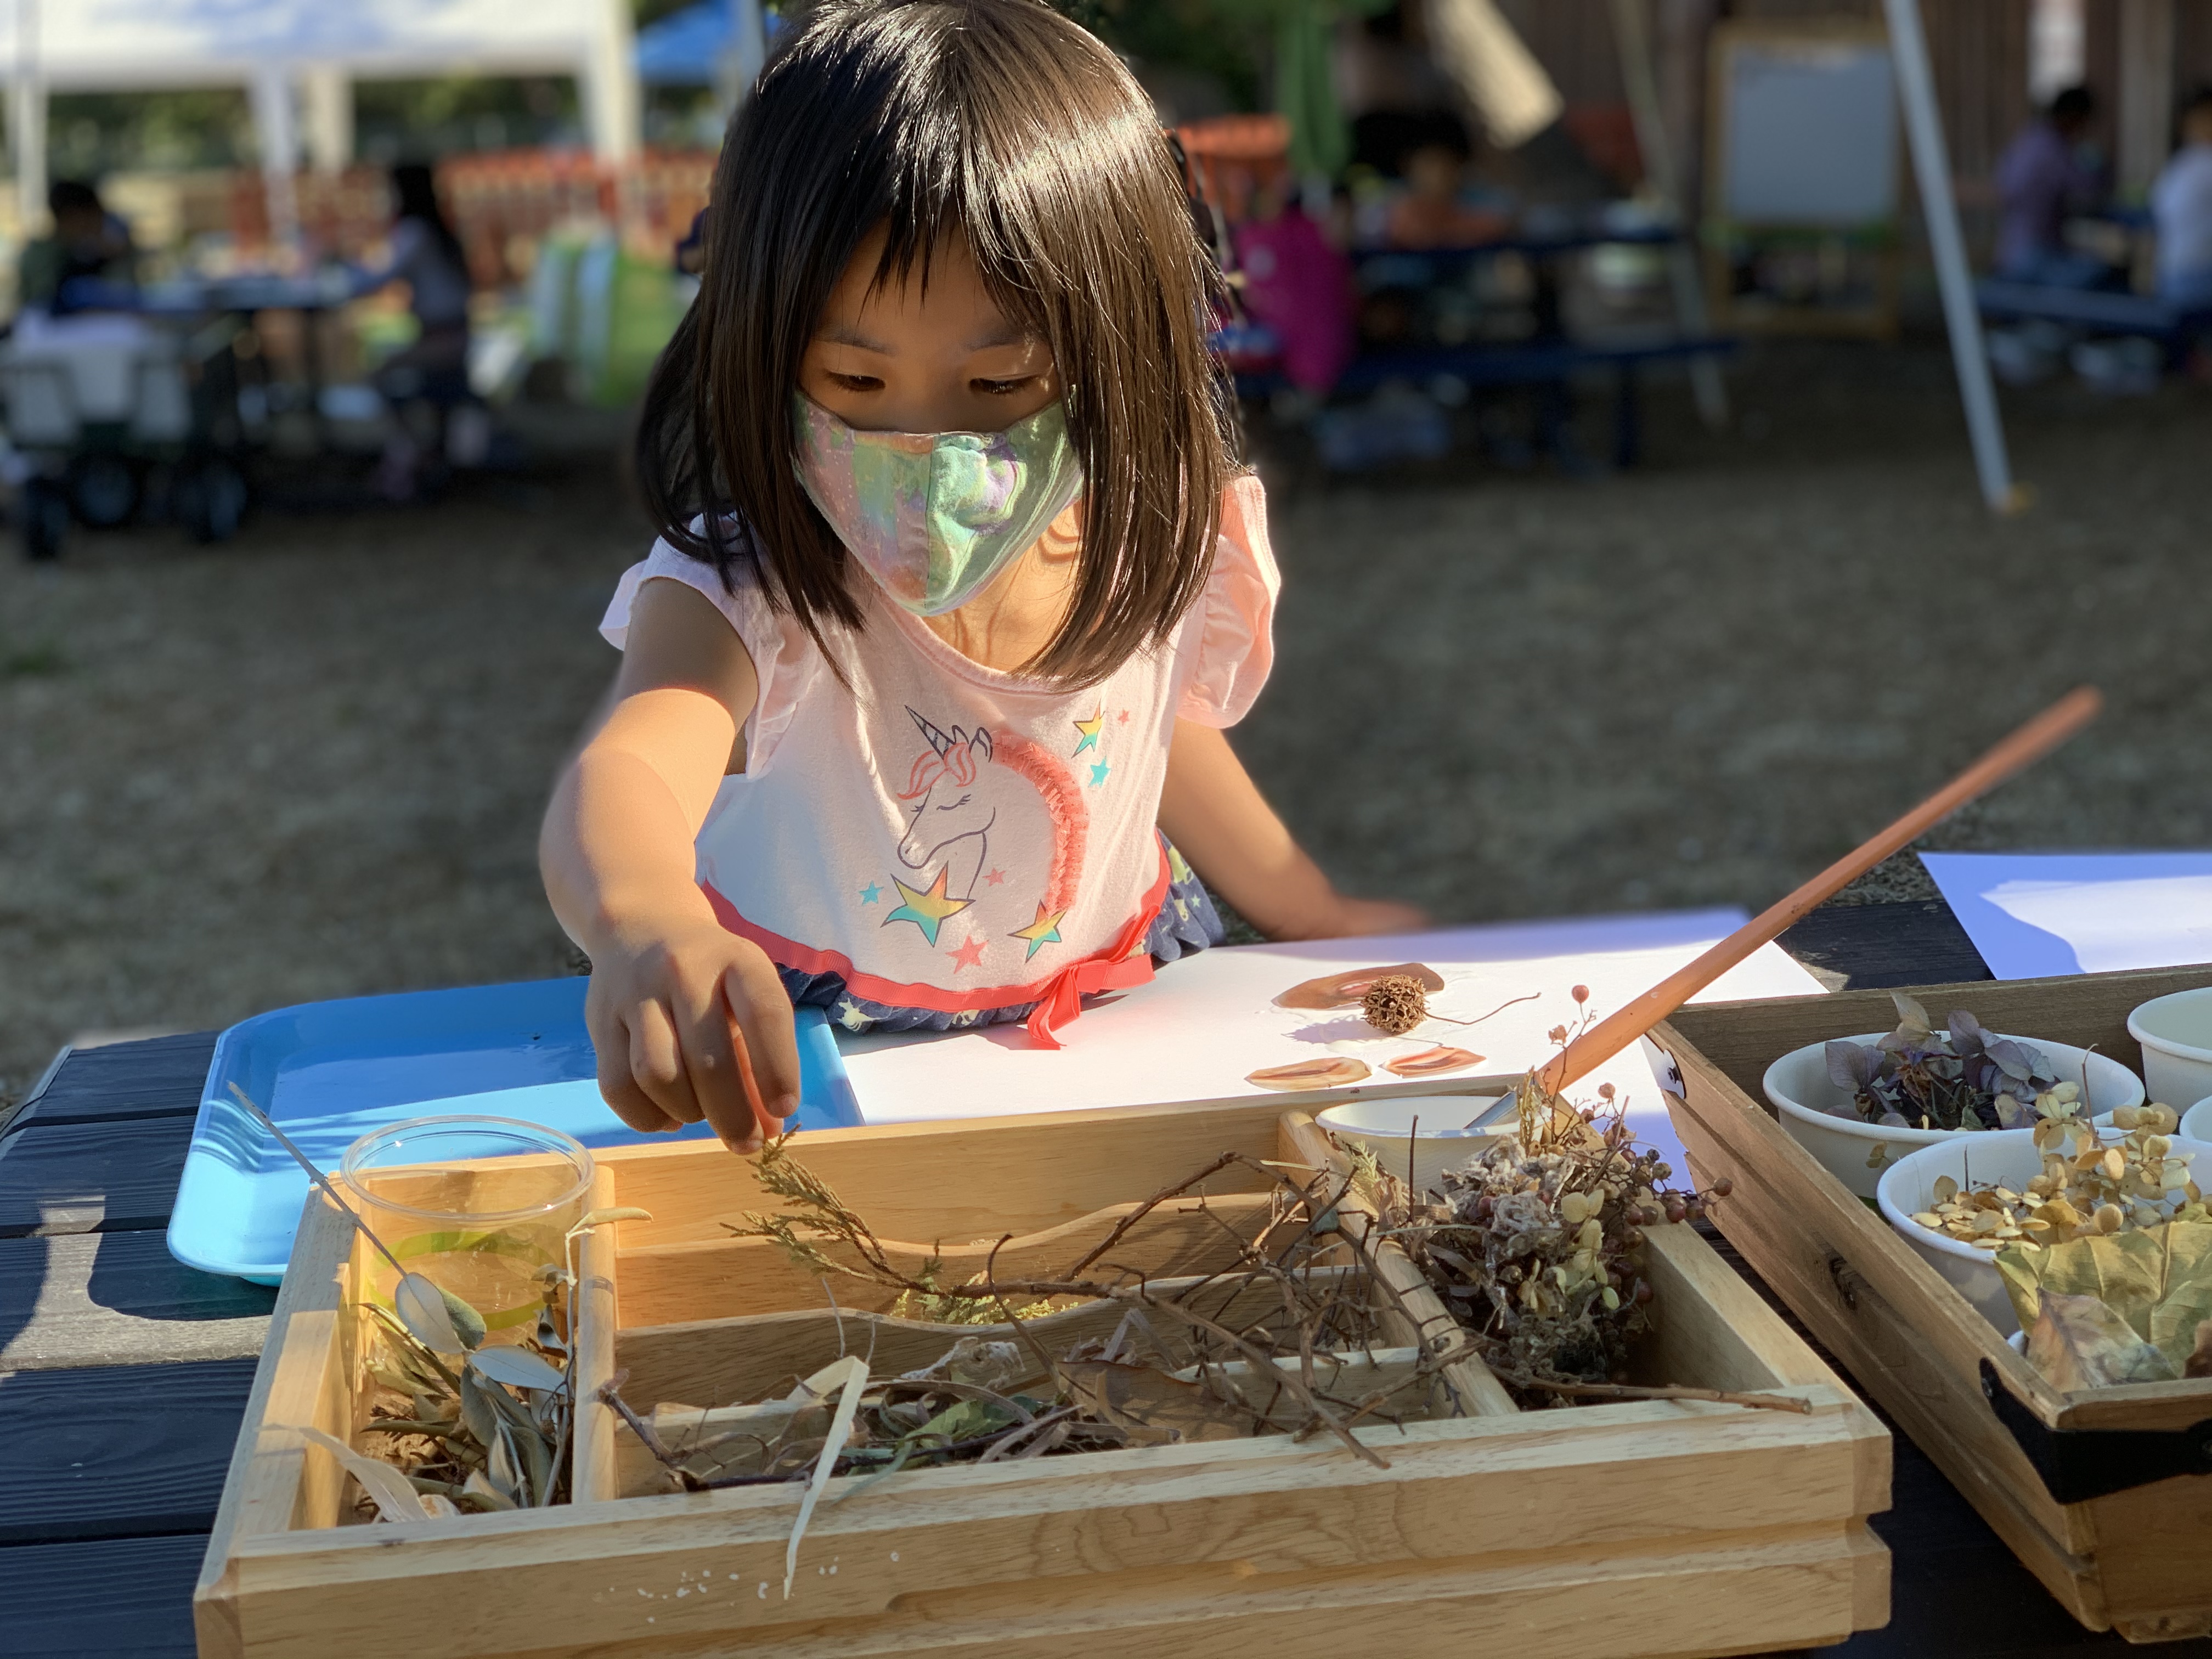 Outdoor Learning in the Early Years – “The Environment is the Third Teacher”